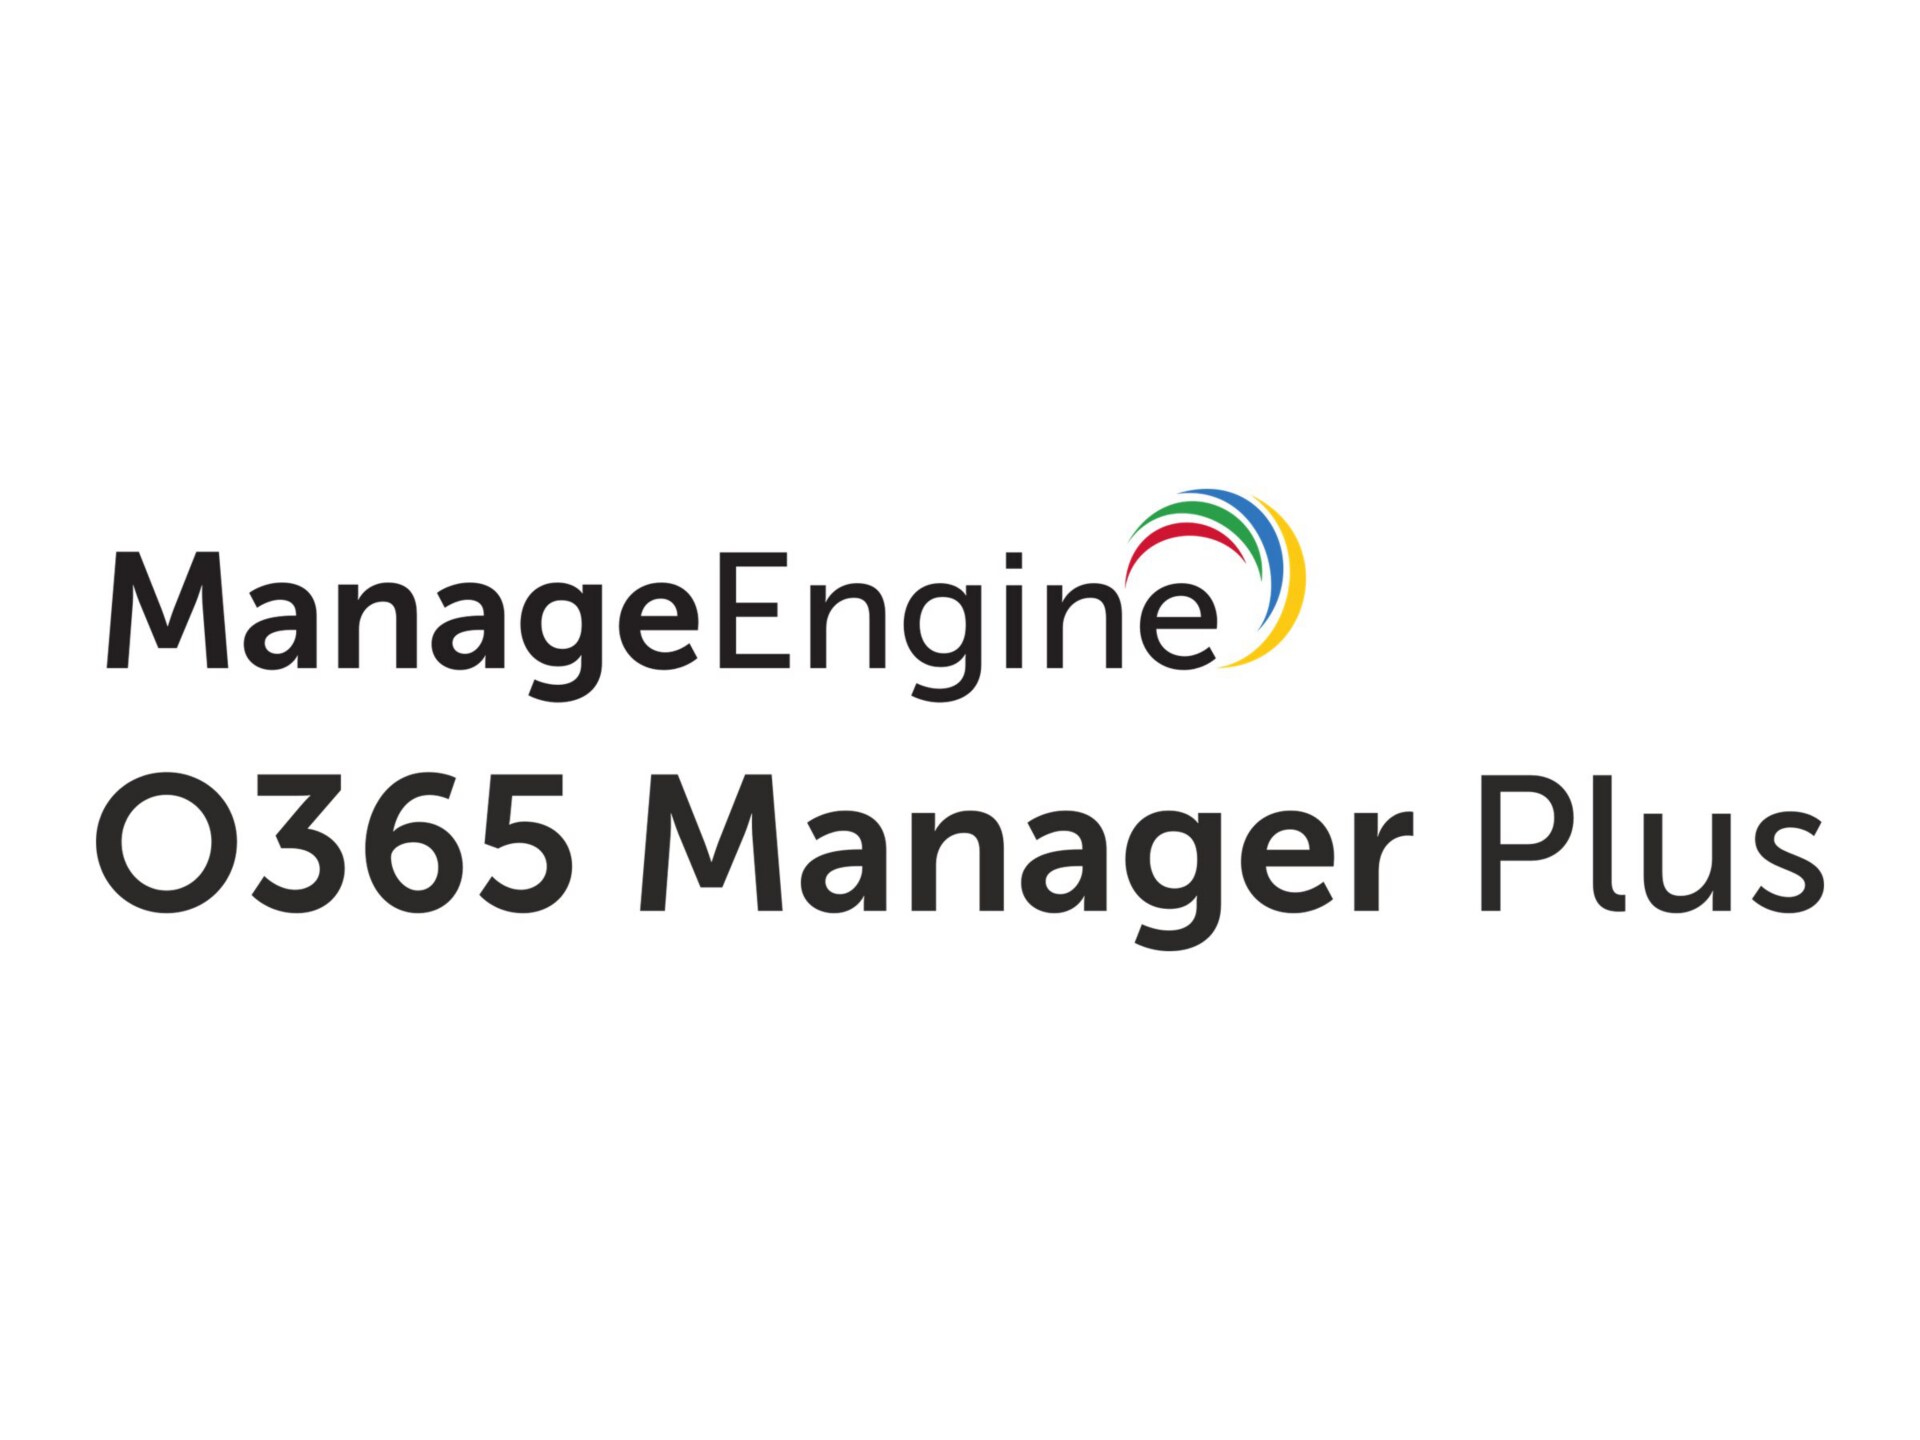 ManageEngine O365 Manager Plus Professional Edition - subscription license (1 year) - 100 users, 1 helpdesk technician